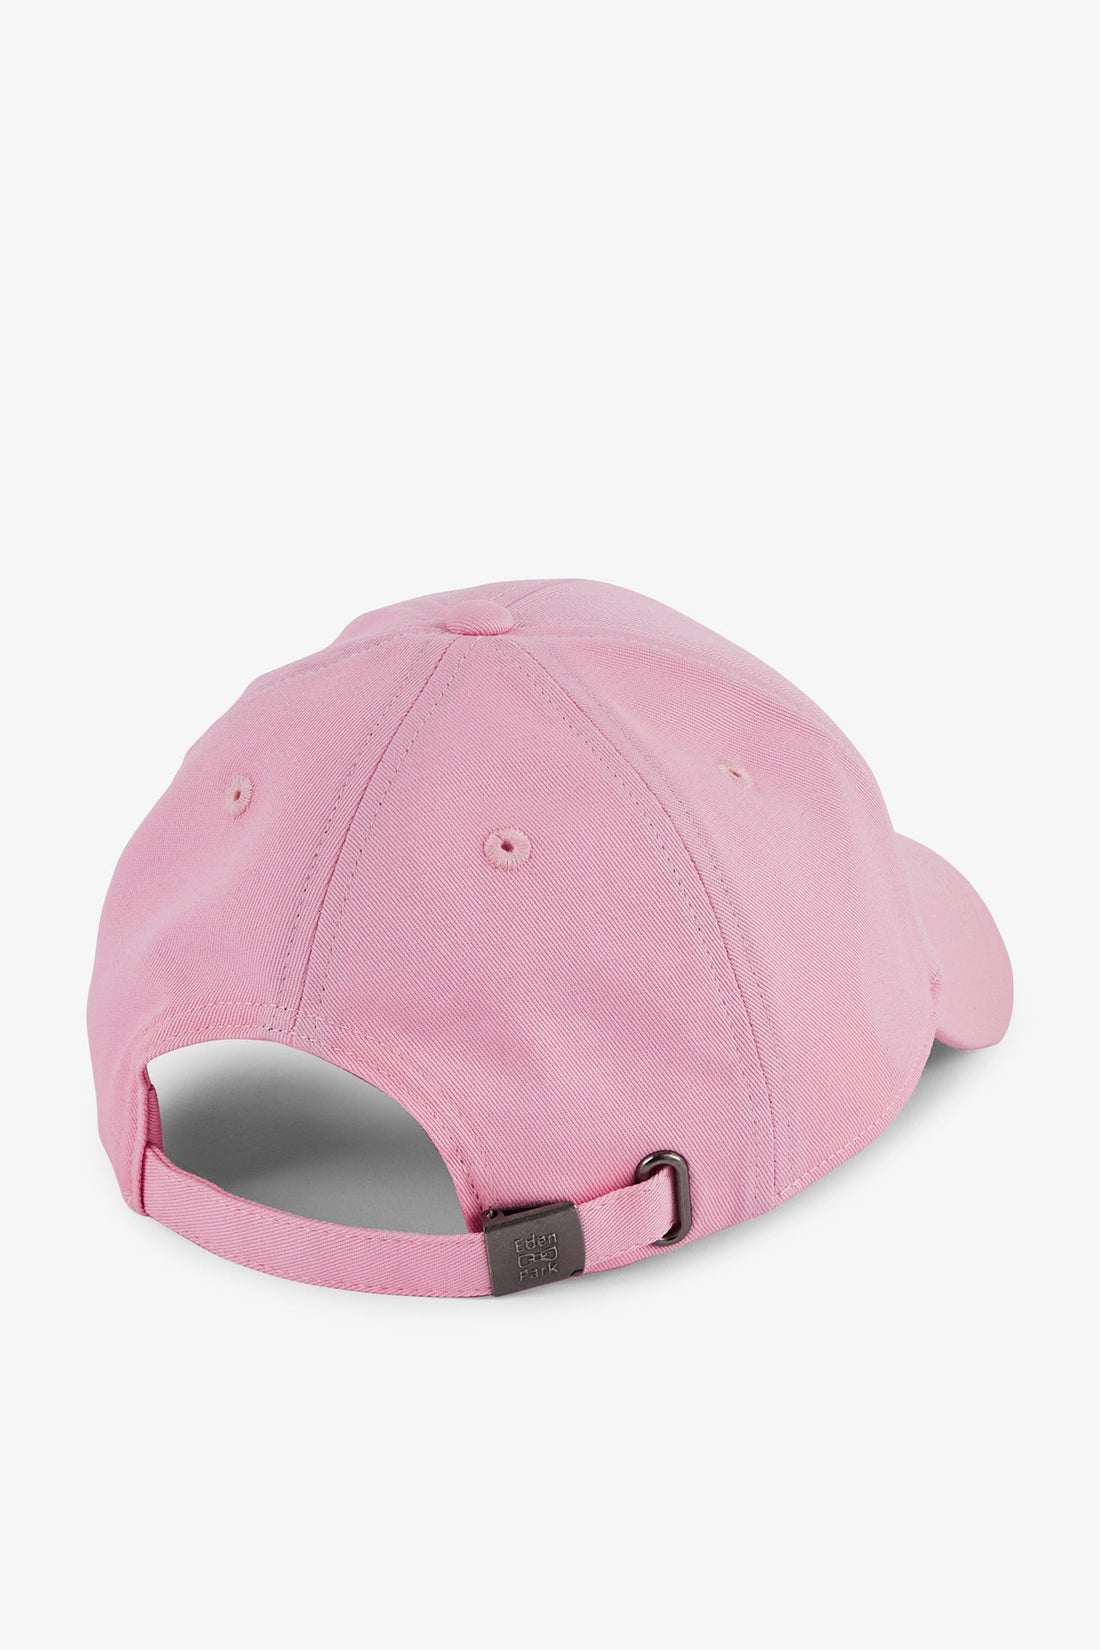 Pink Cotton Canvas Cap With Bow Tie Embroidery_E24CHACA0001_ROM_02